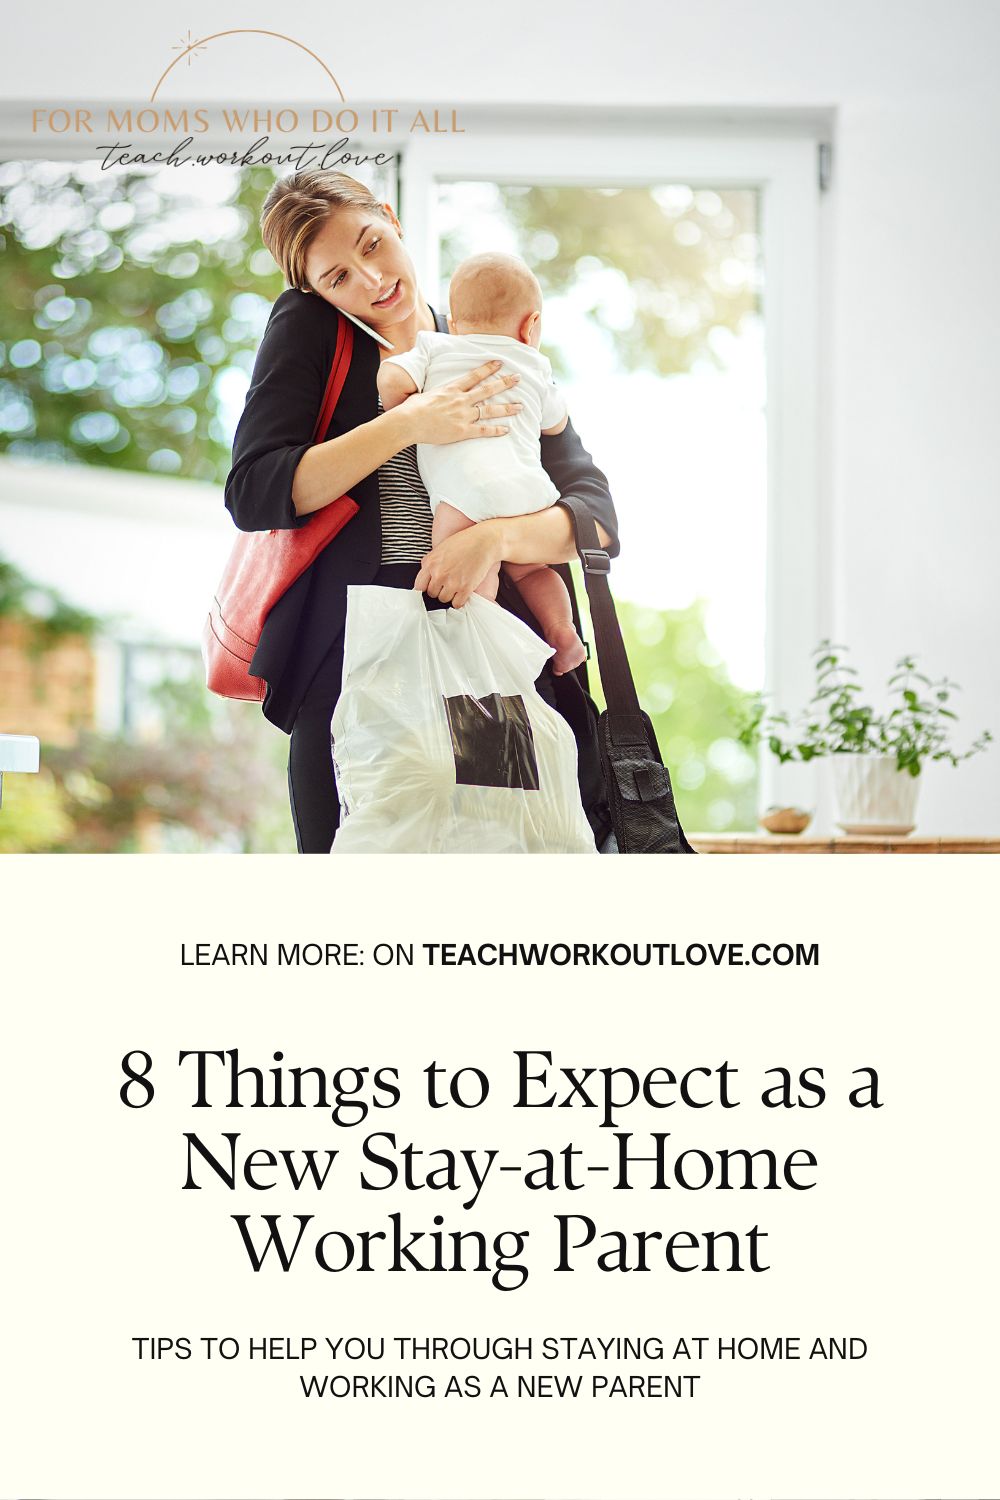 If you’re a first-time stay-at-home parent, here are some of the things you should expect from the “WFH” life: